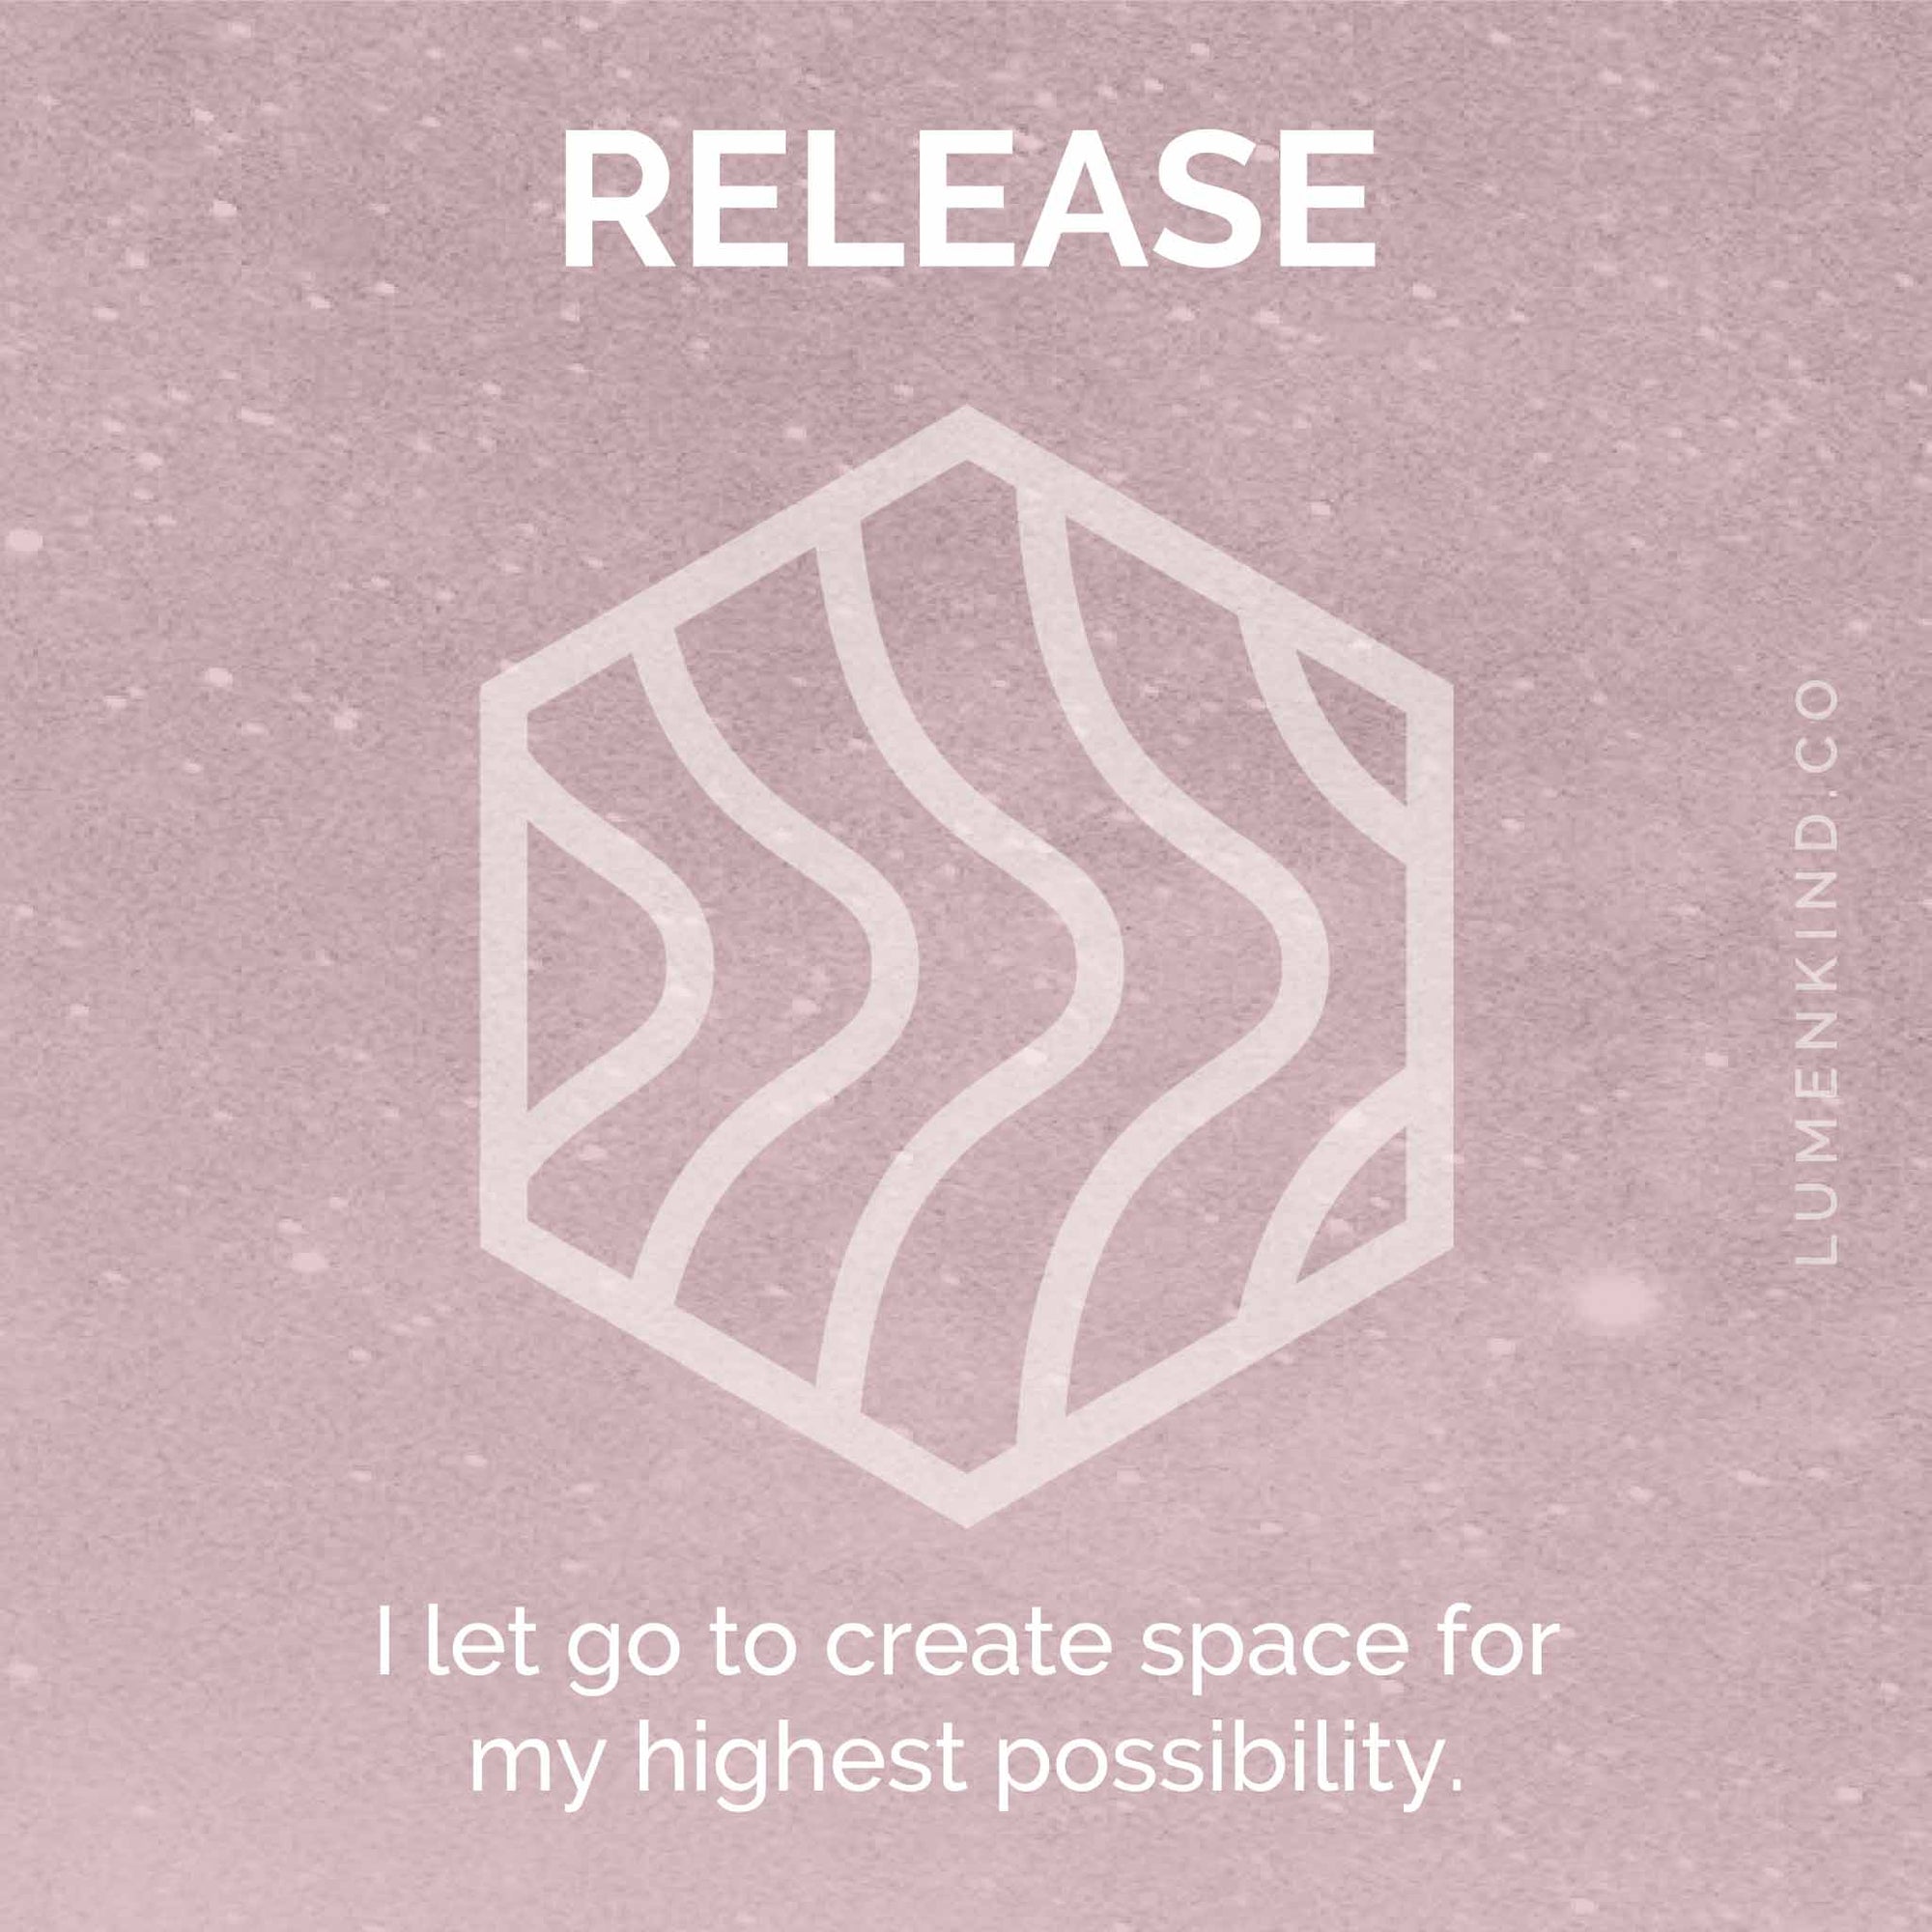 The suggested intention is RELEASE. I let go to create space for my highest possibility.